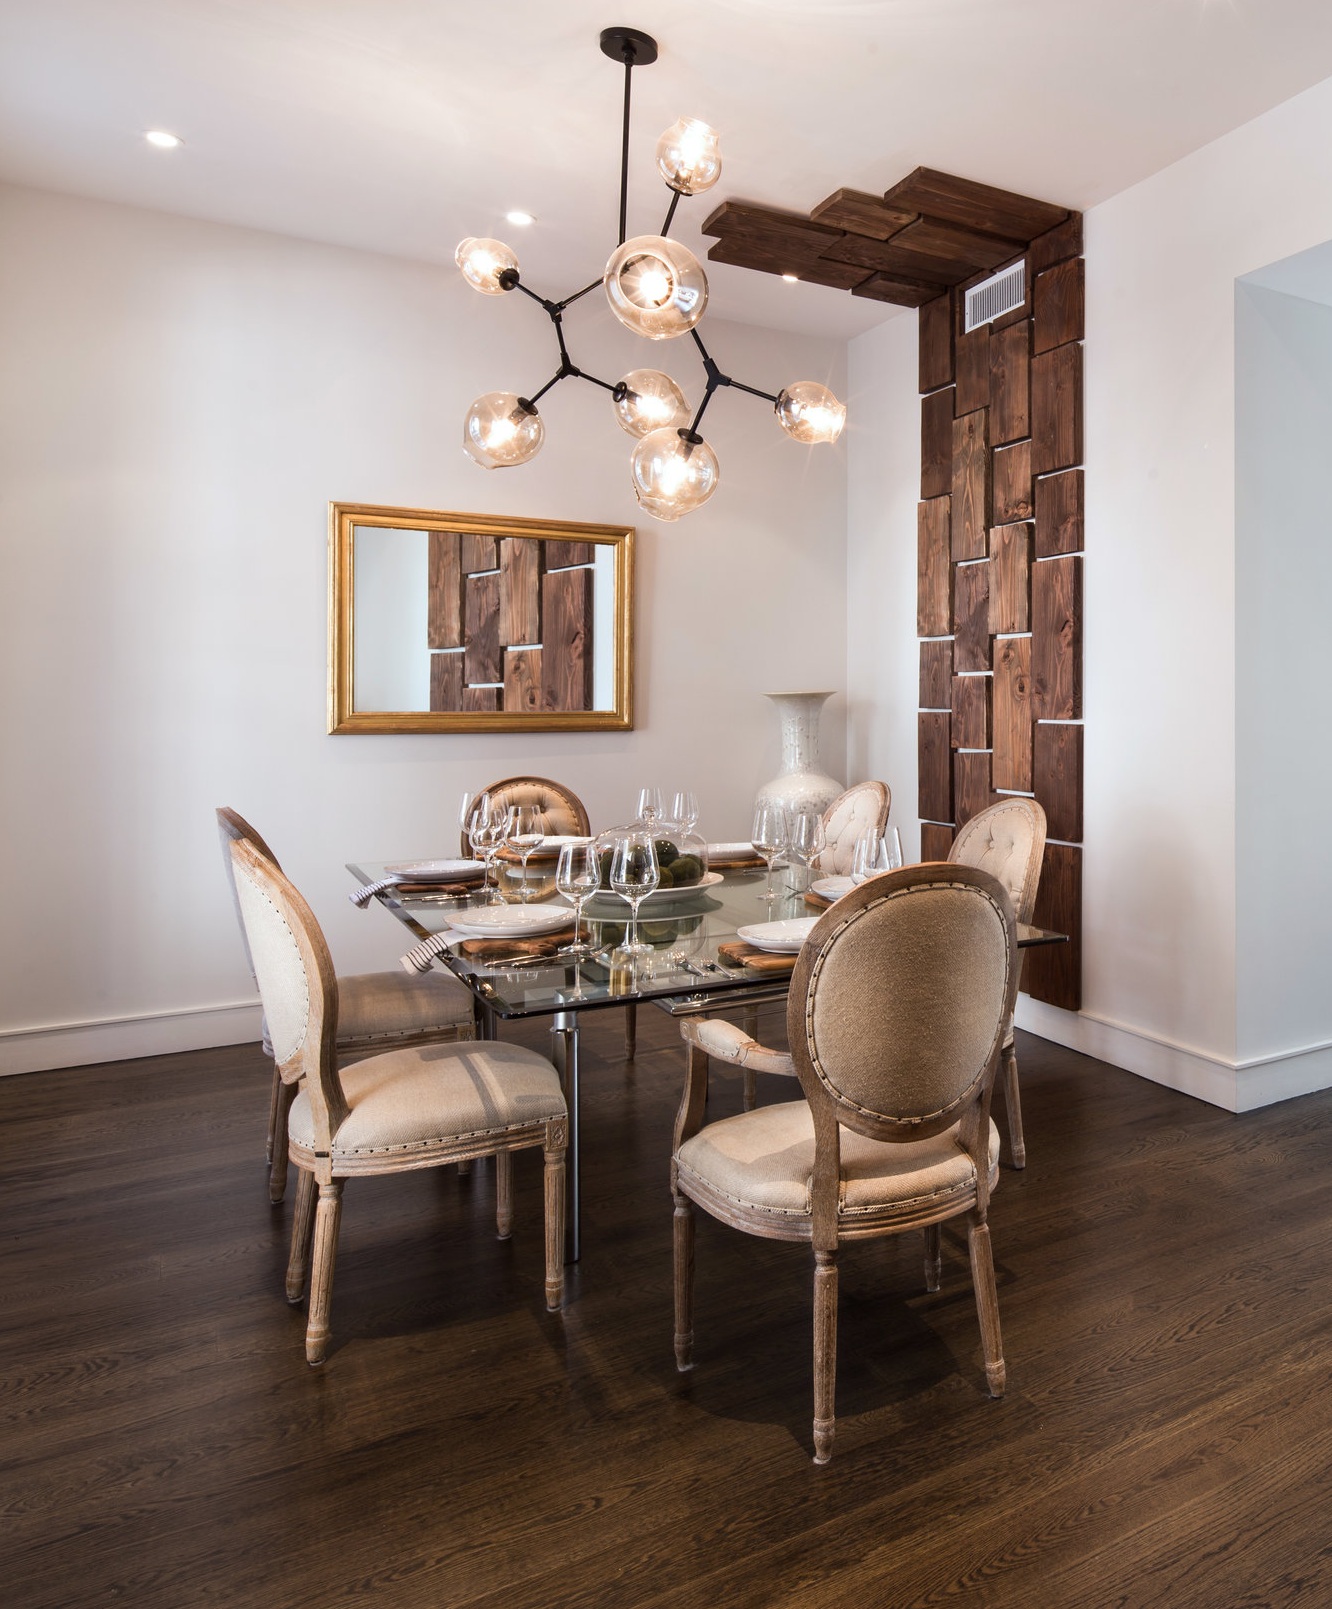 Interiors Photography - Dining Area